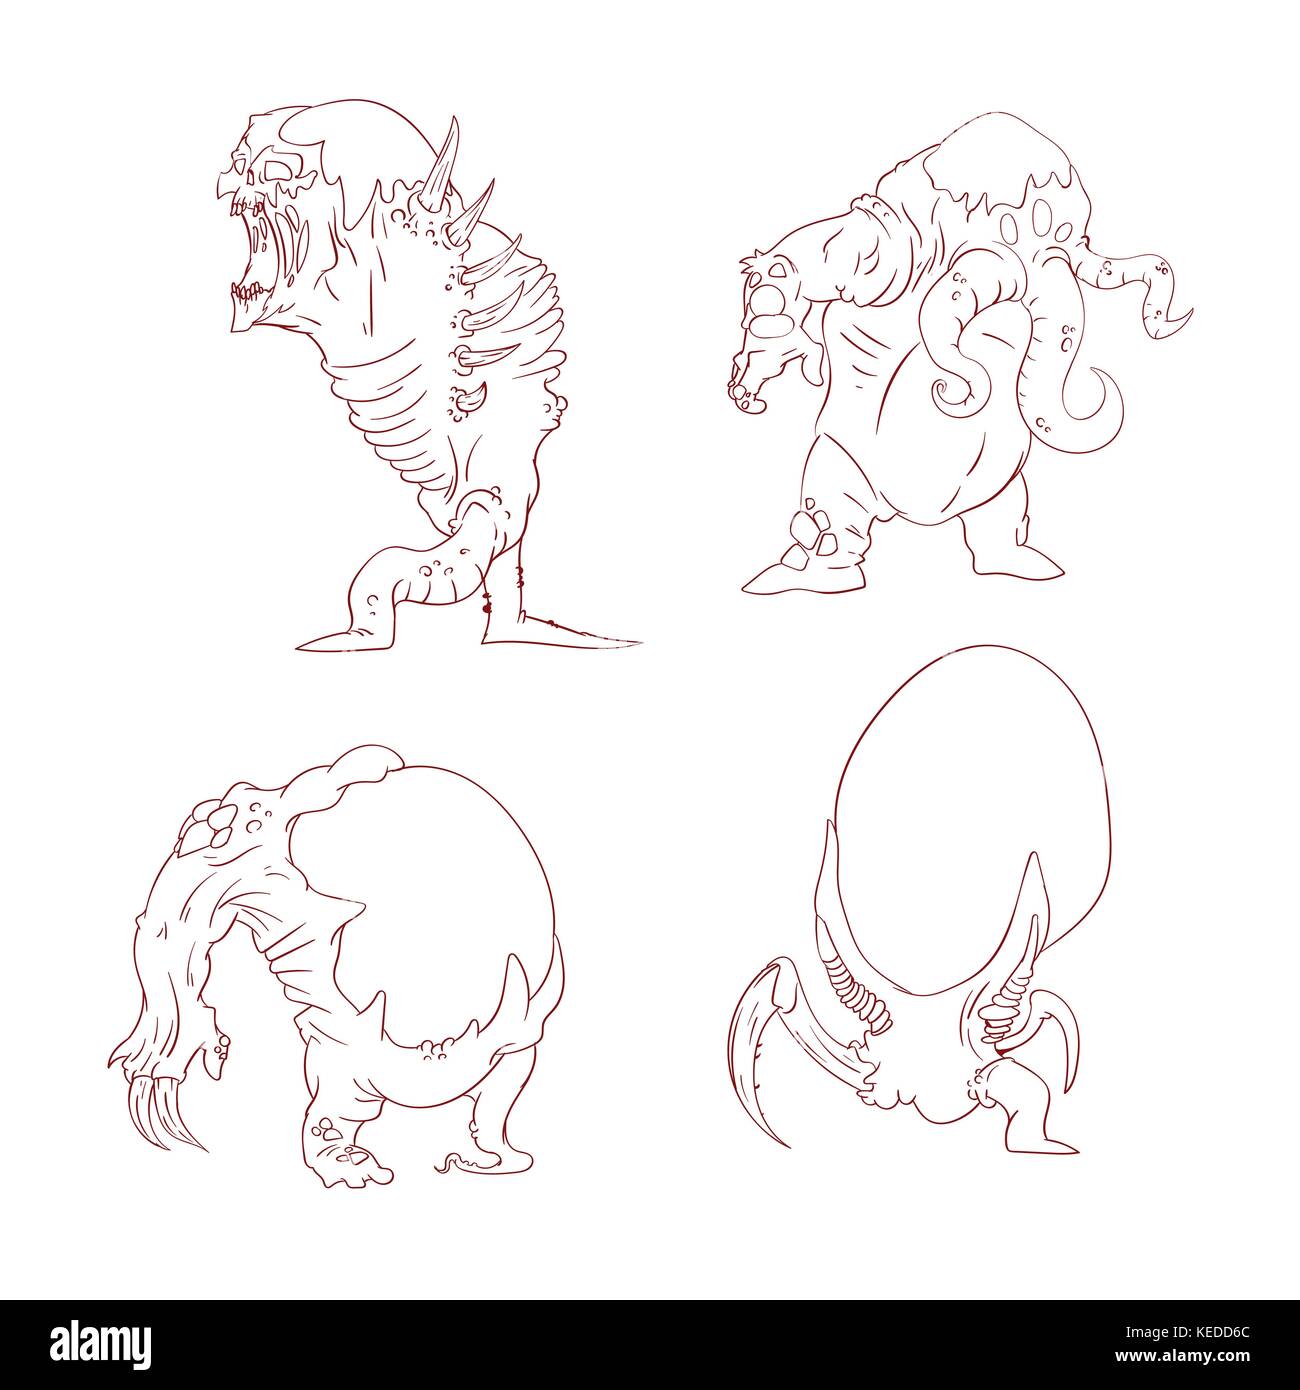 Collection of line drawn vector illustrations of alien mutant monsters Stock Vector